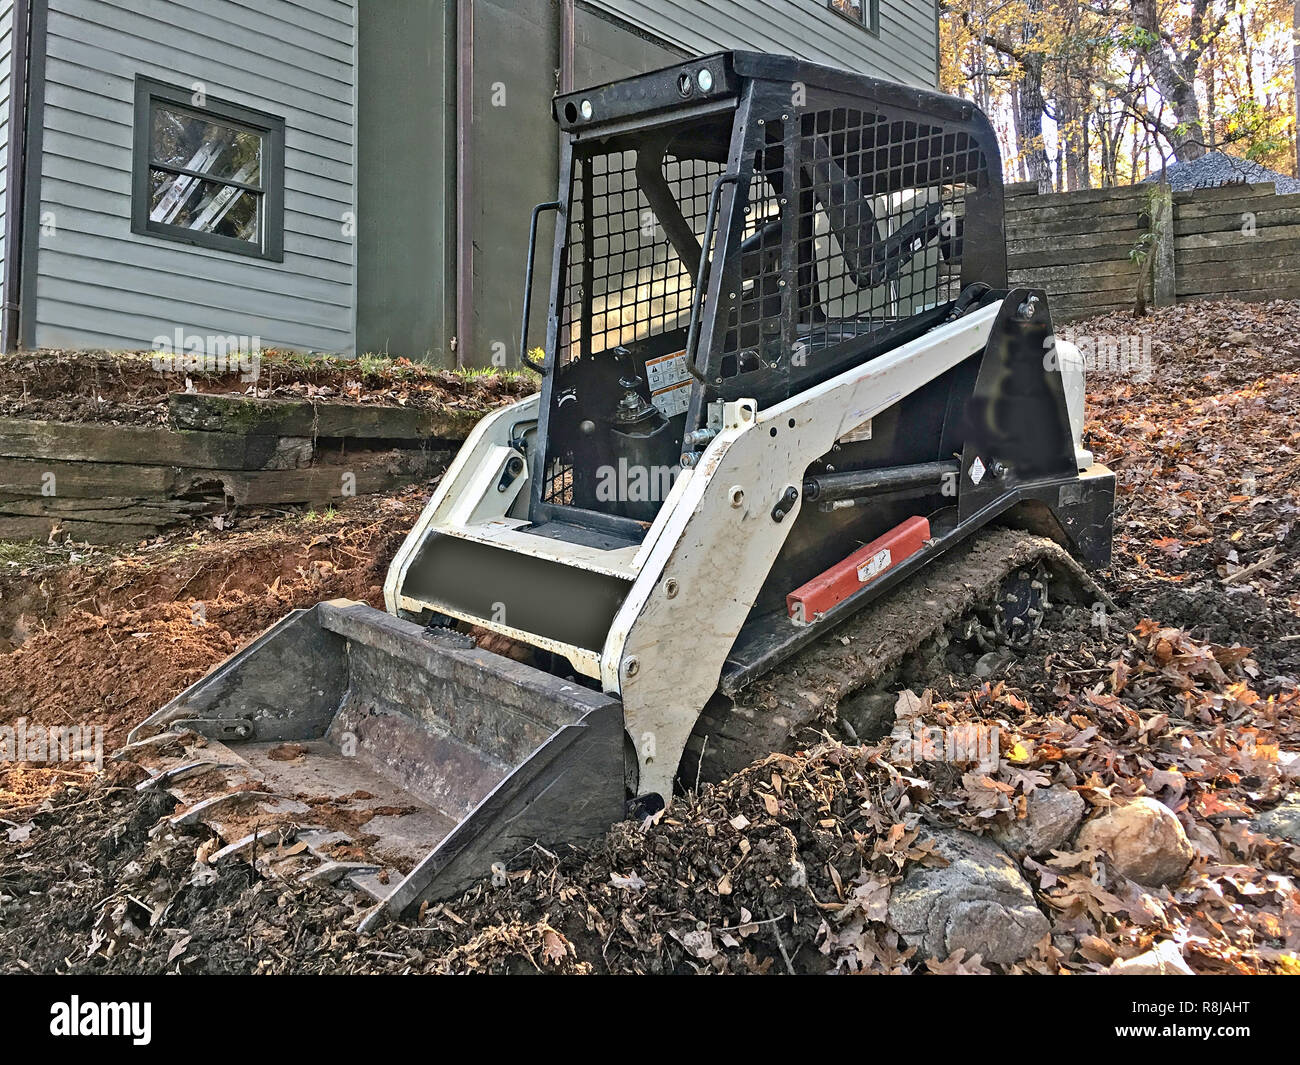 A small Bulldozer on the side of a house ready to get to work. Stock Photo